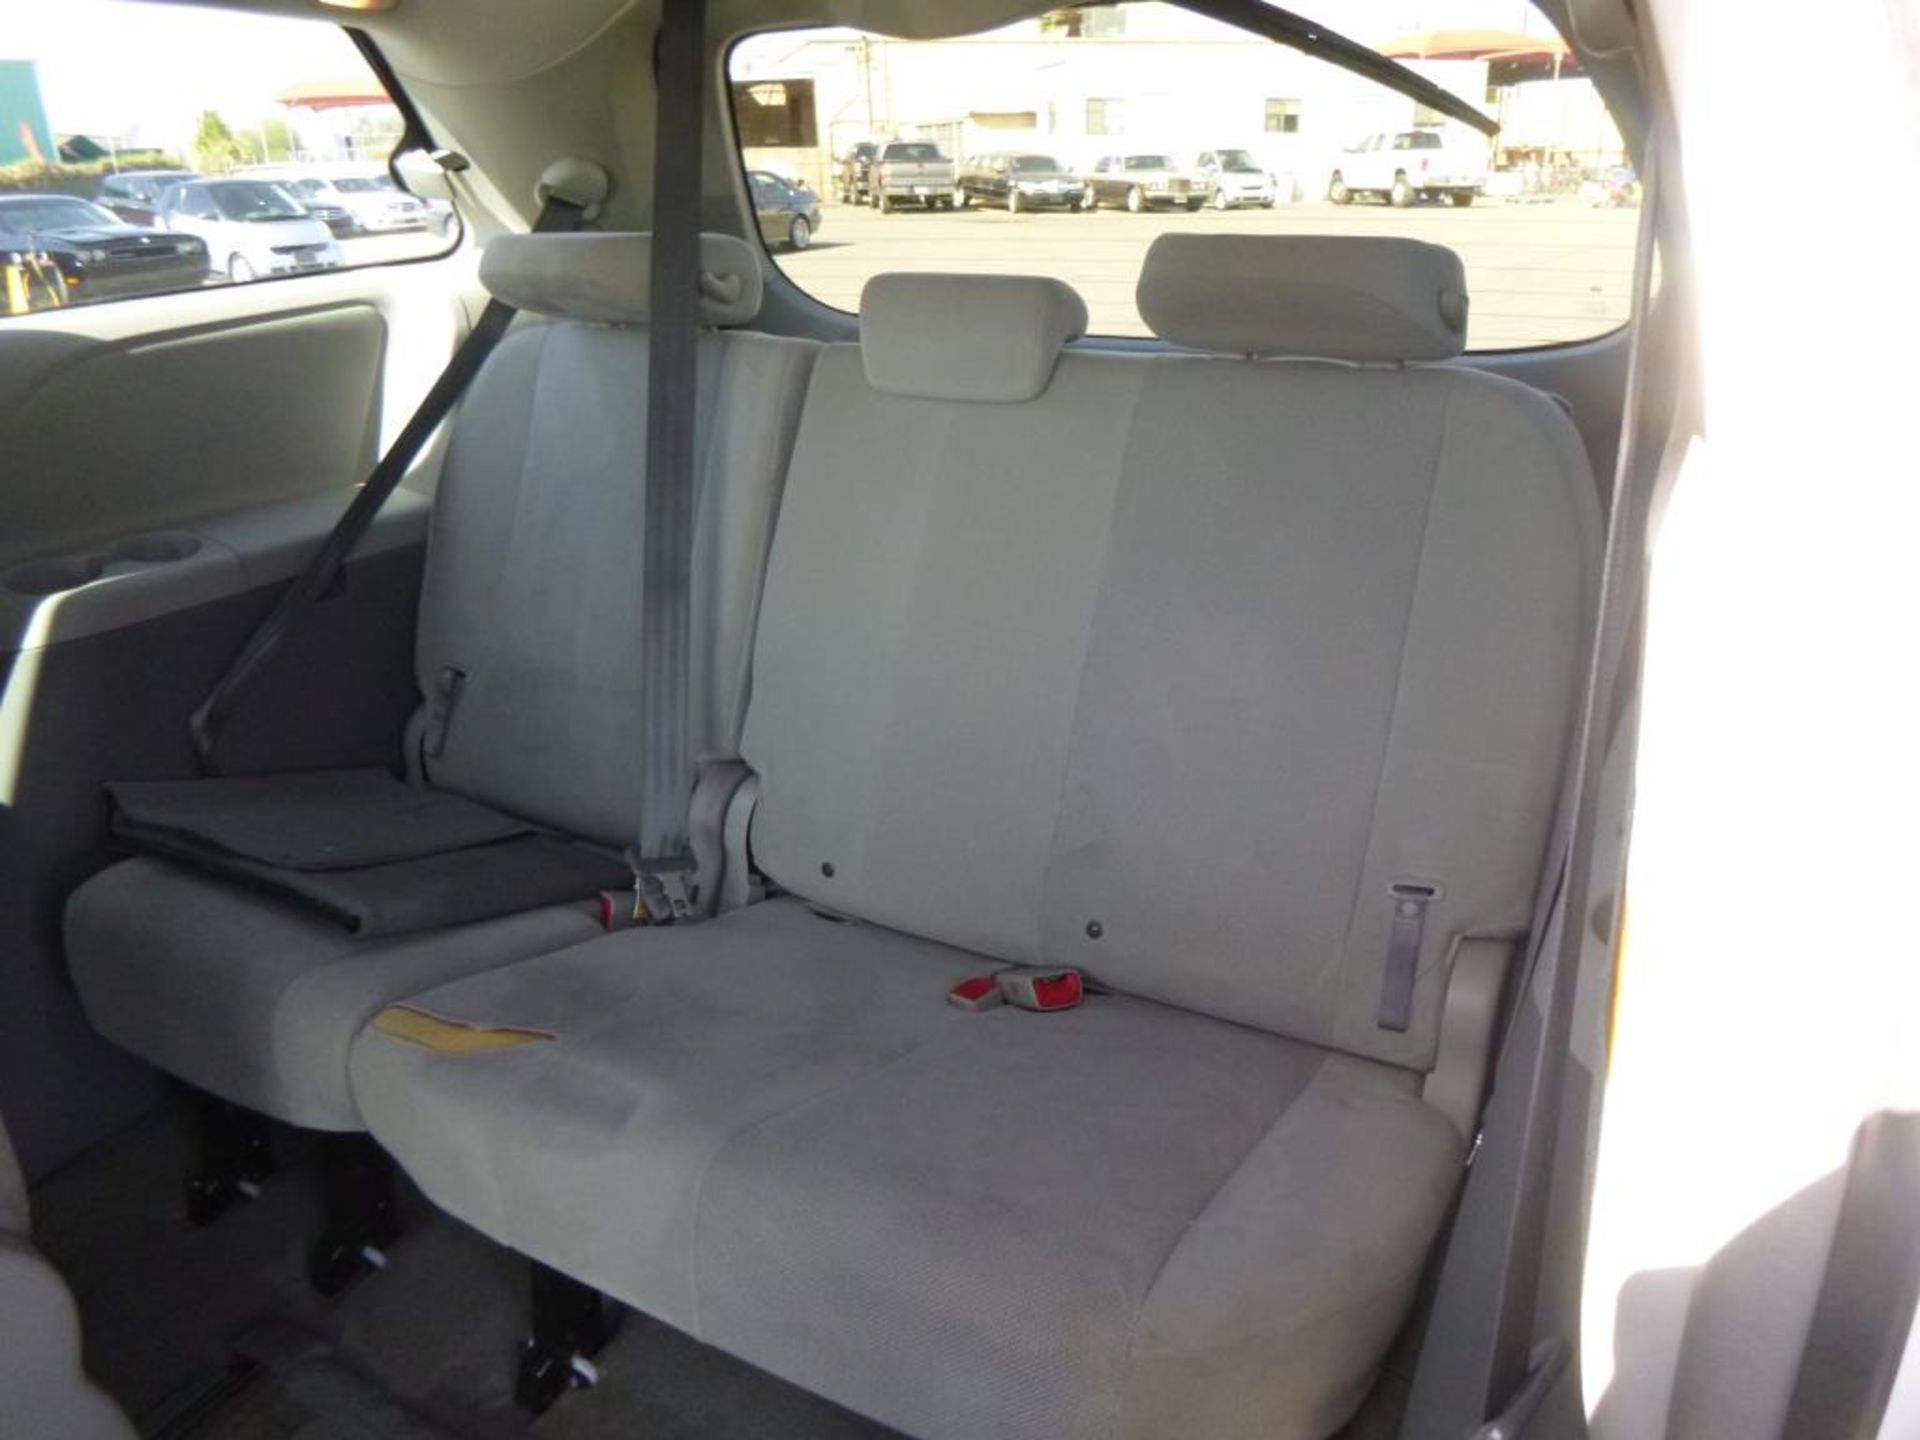 (Lot # 3355) 2012 Toyota Sienna - Image 9 of 16